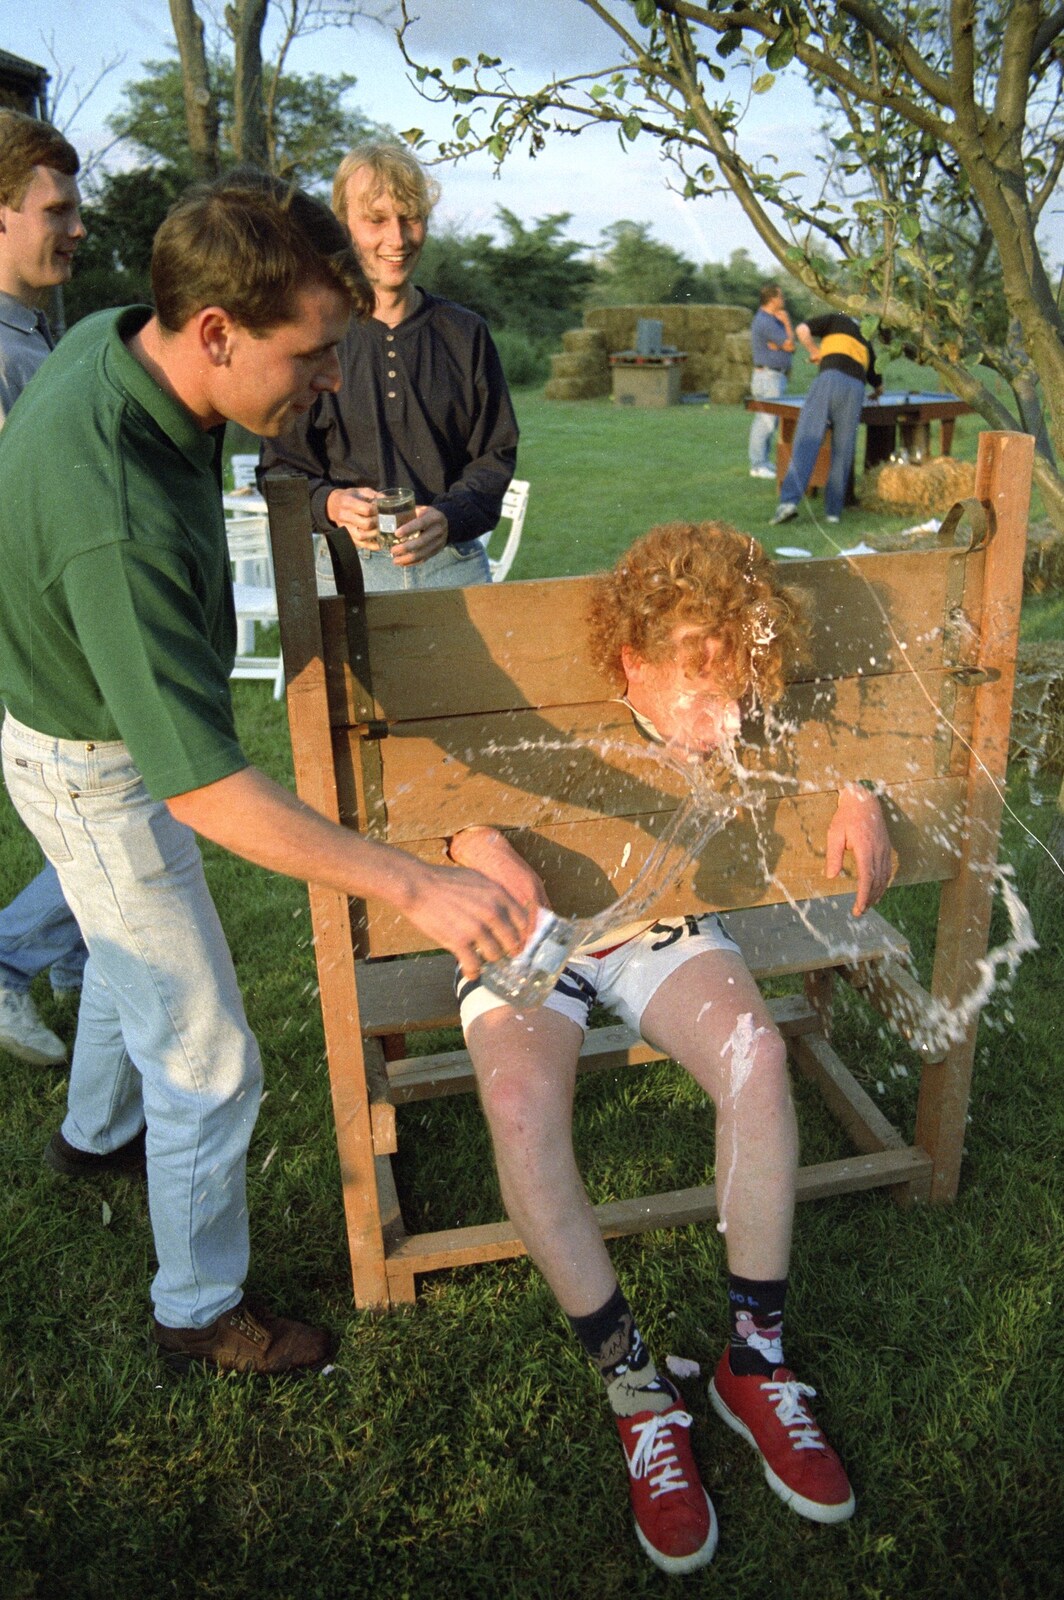 Ricey gets active with some water from Bromestock 1 and a Mortlock Barbeque, Brome and Thrandeston, Suffolk - 24th June 1997